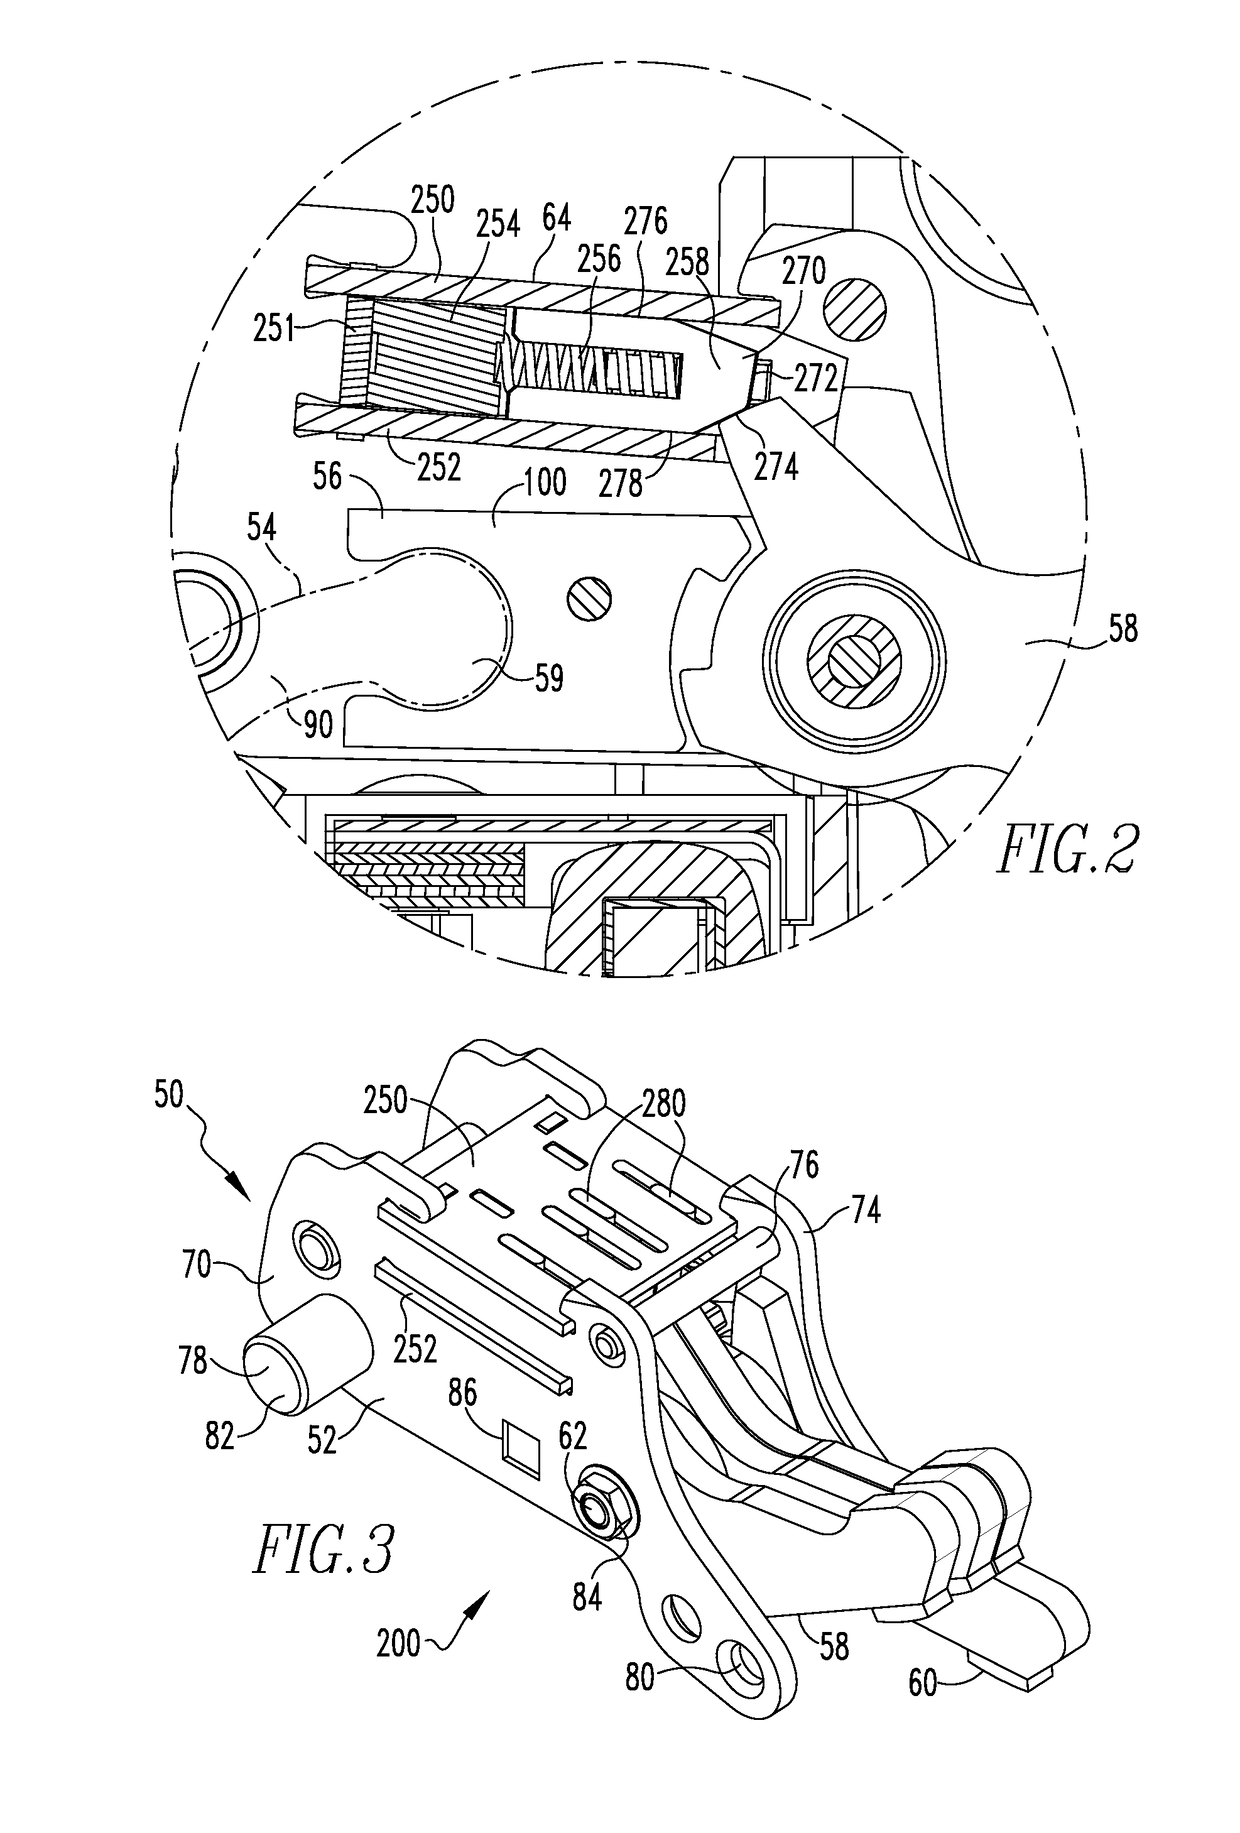 Electrical switching apparatus and clinch joint assembly therefor